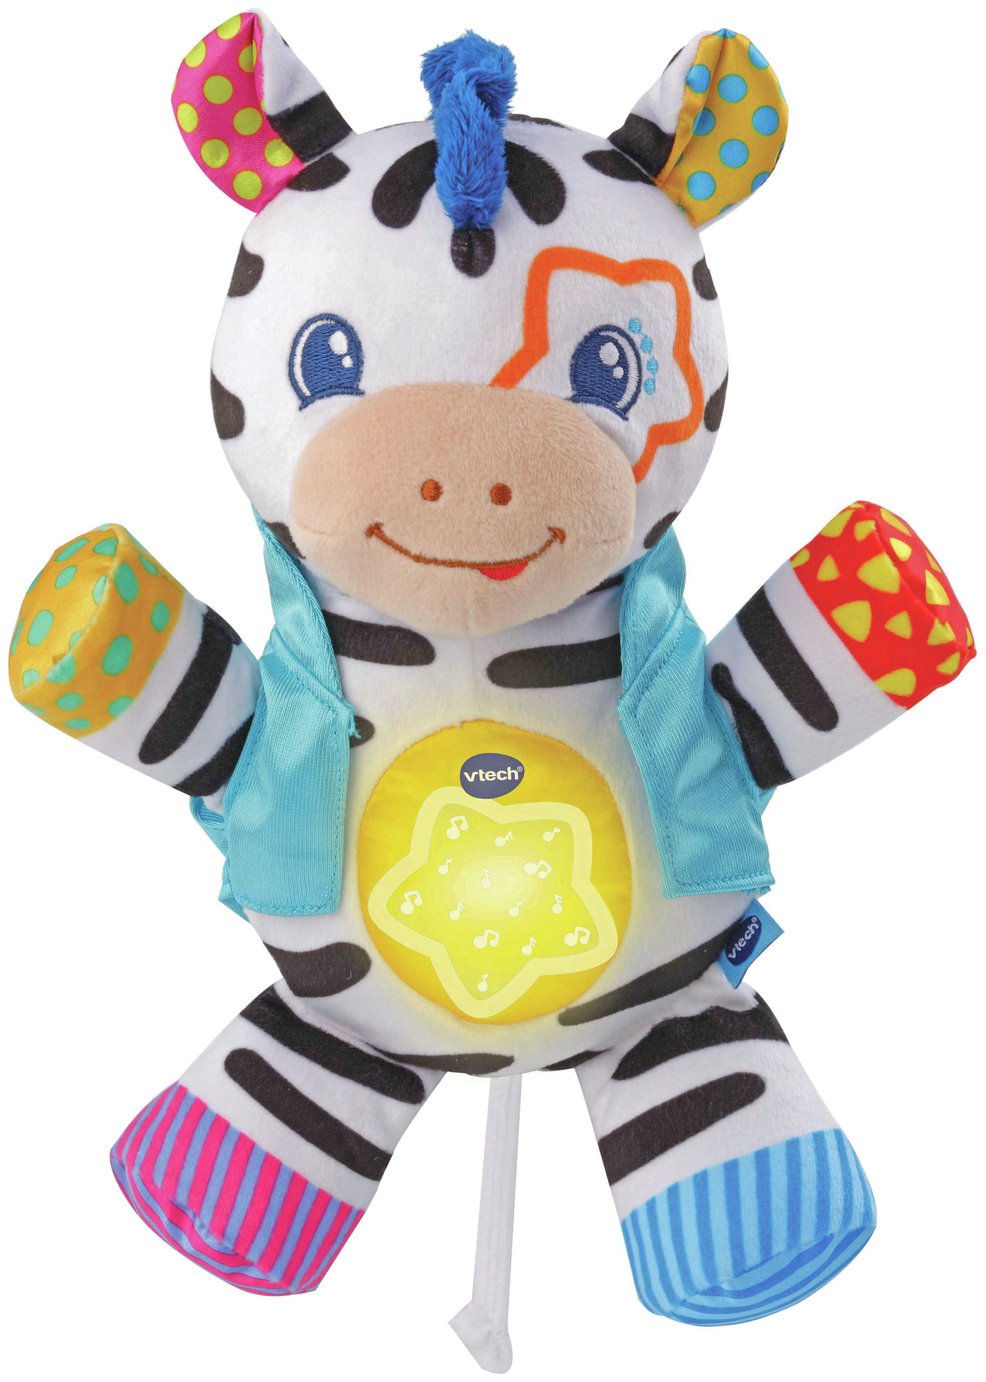 VTech Lights and Stripes Review